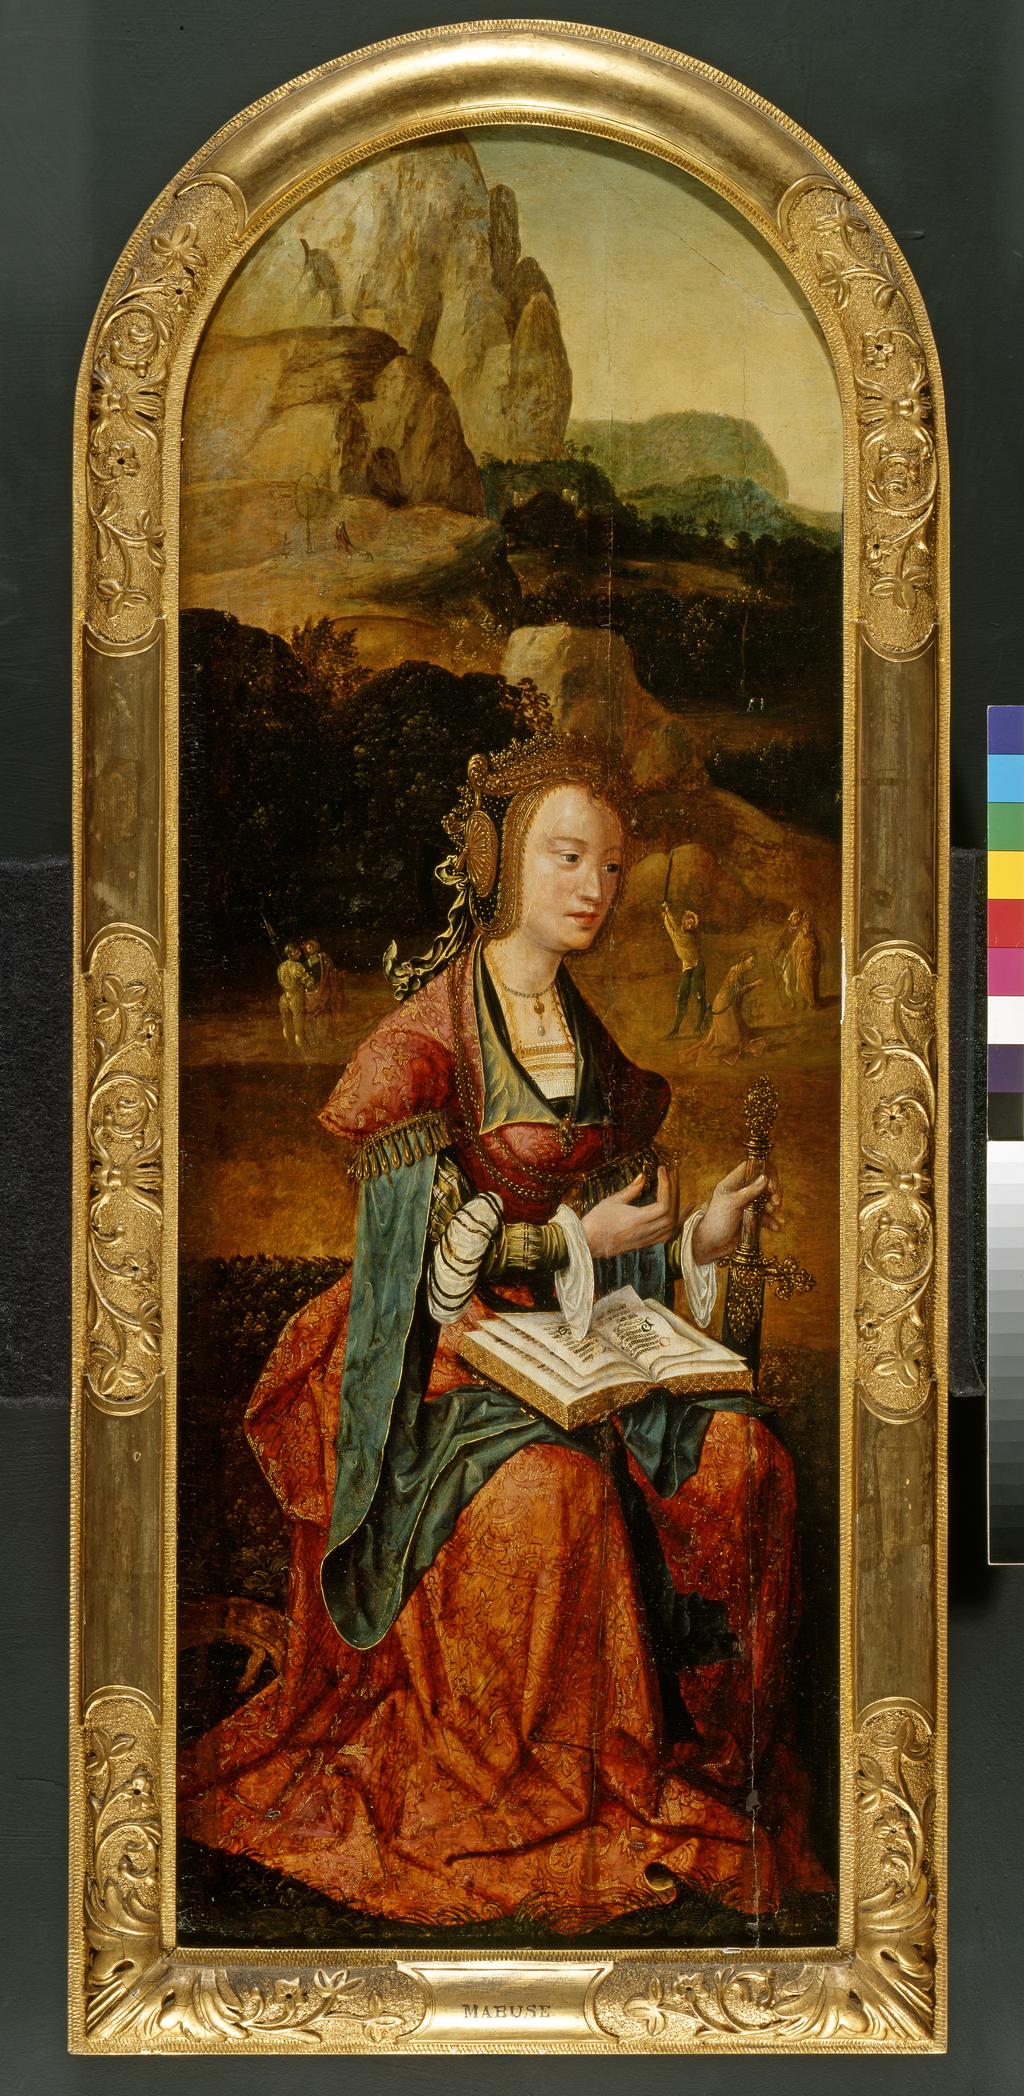 An image of St. Catherine of Alexandria. Unknown, Flemish. Oil on panel. Left wing of a triptych. For right see no. 2307. Height 86.5 cm, width 31.8 cm. Early 16th Century.